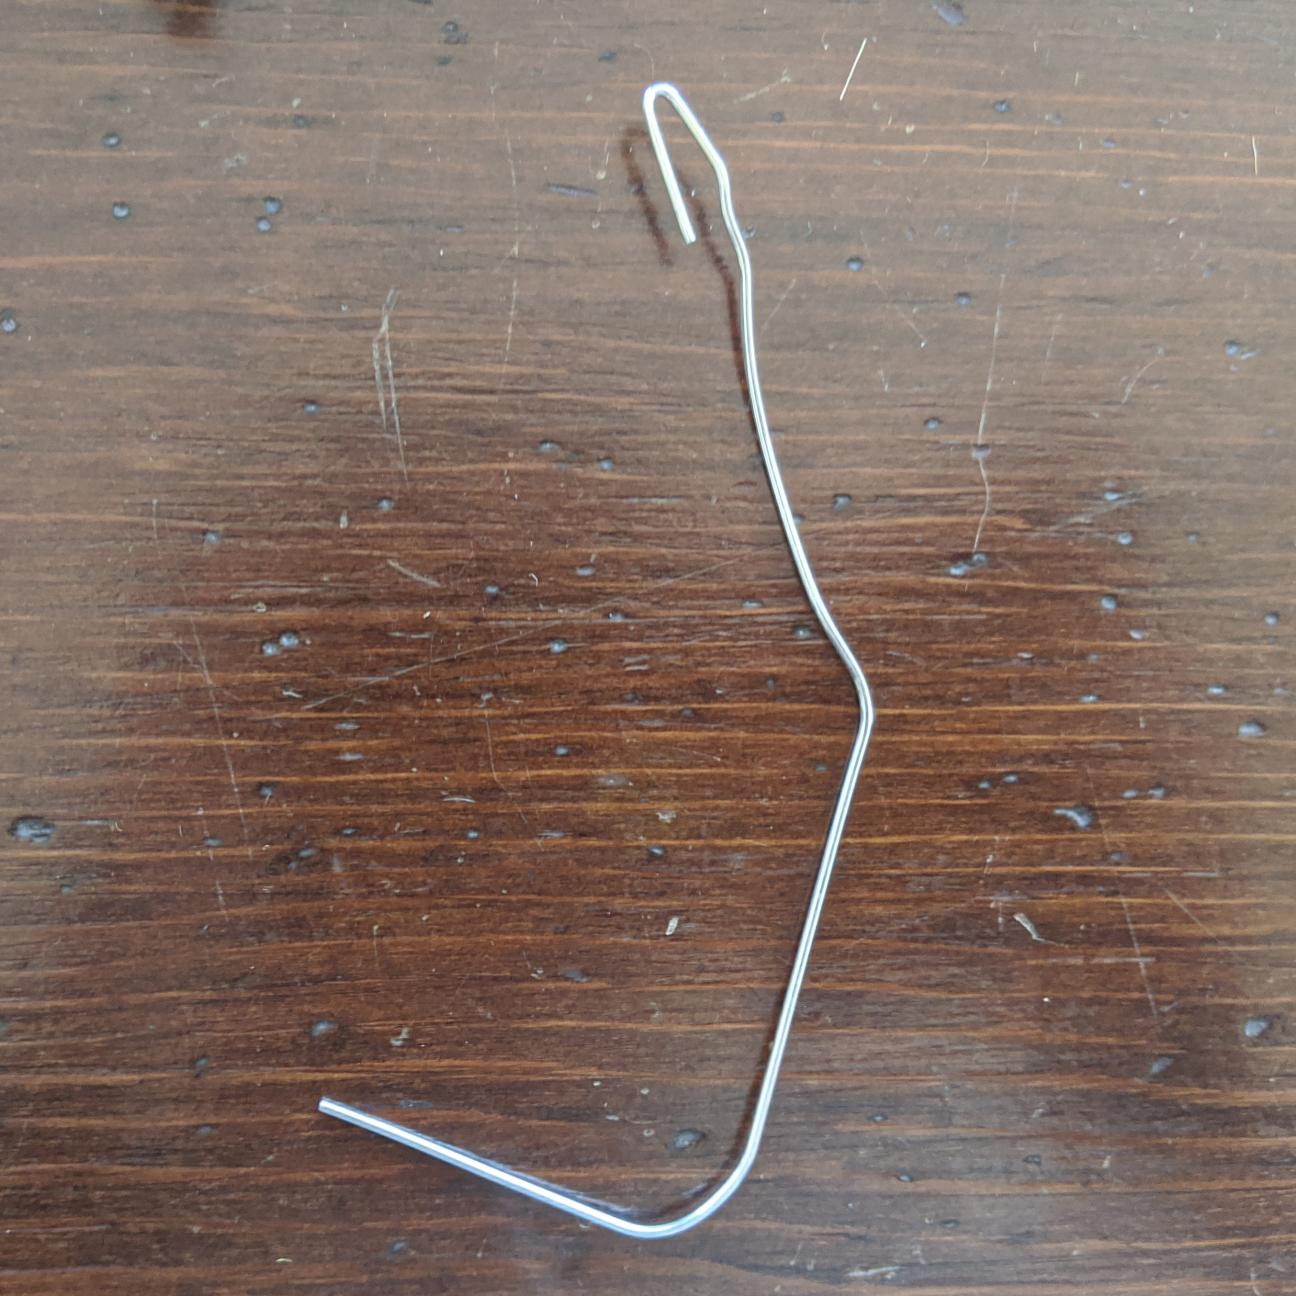 A unbent paperclip, with one end bent to form a small hook.